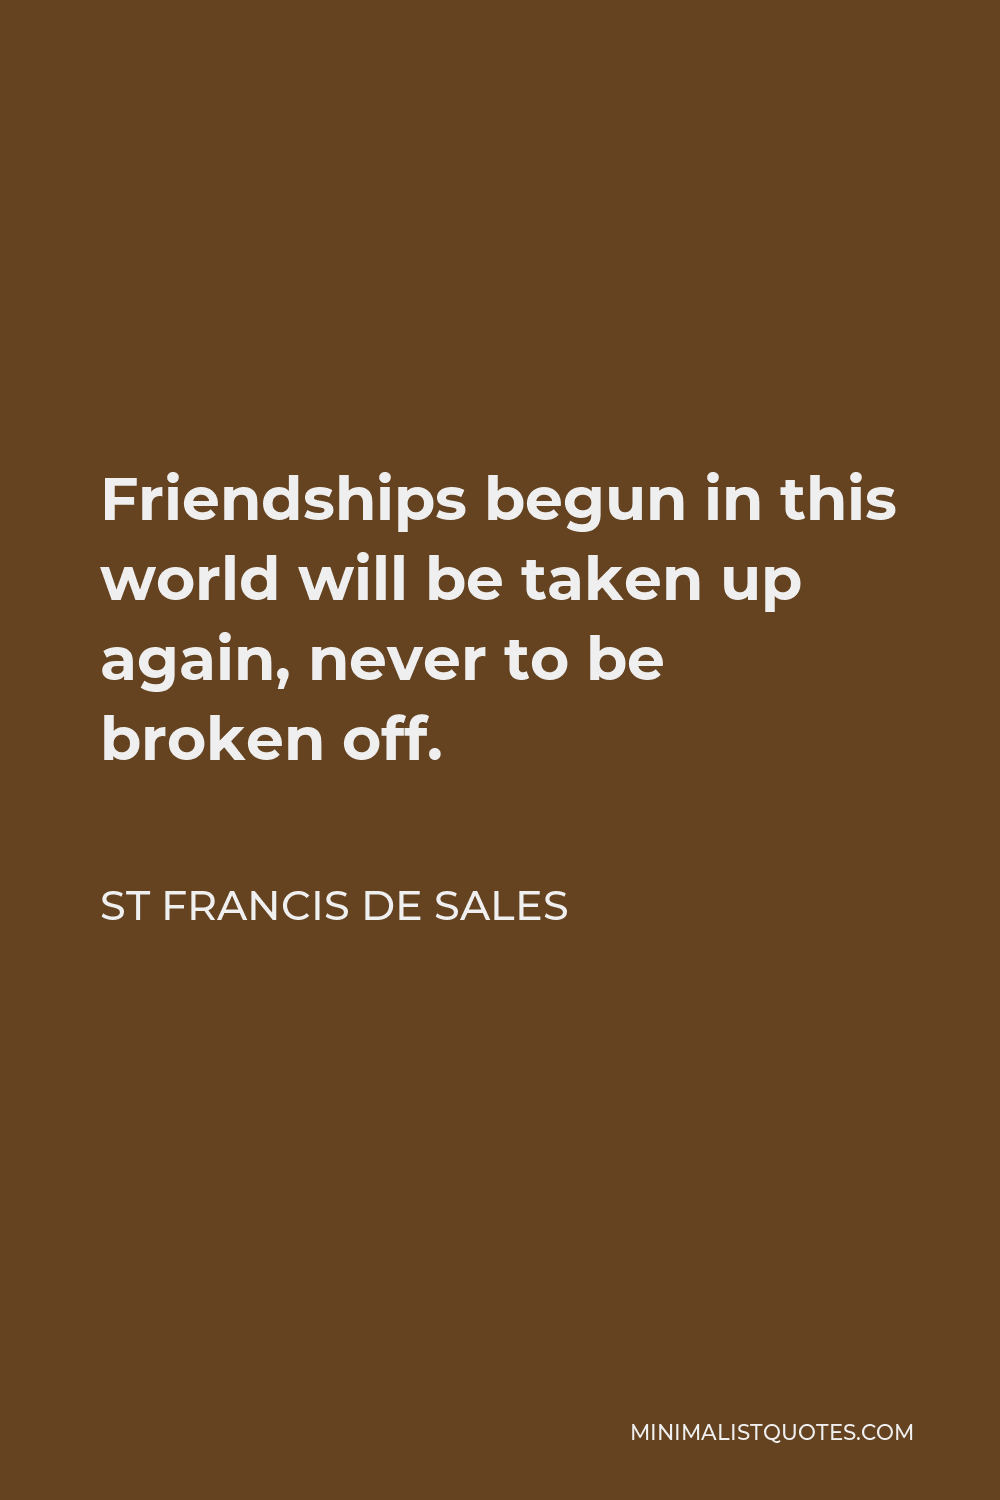 St Francis De Sales Quote - Friendships begun in this world will be taken up again, never to be broken off.